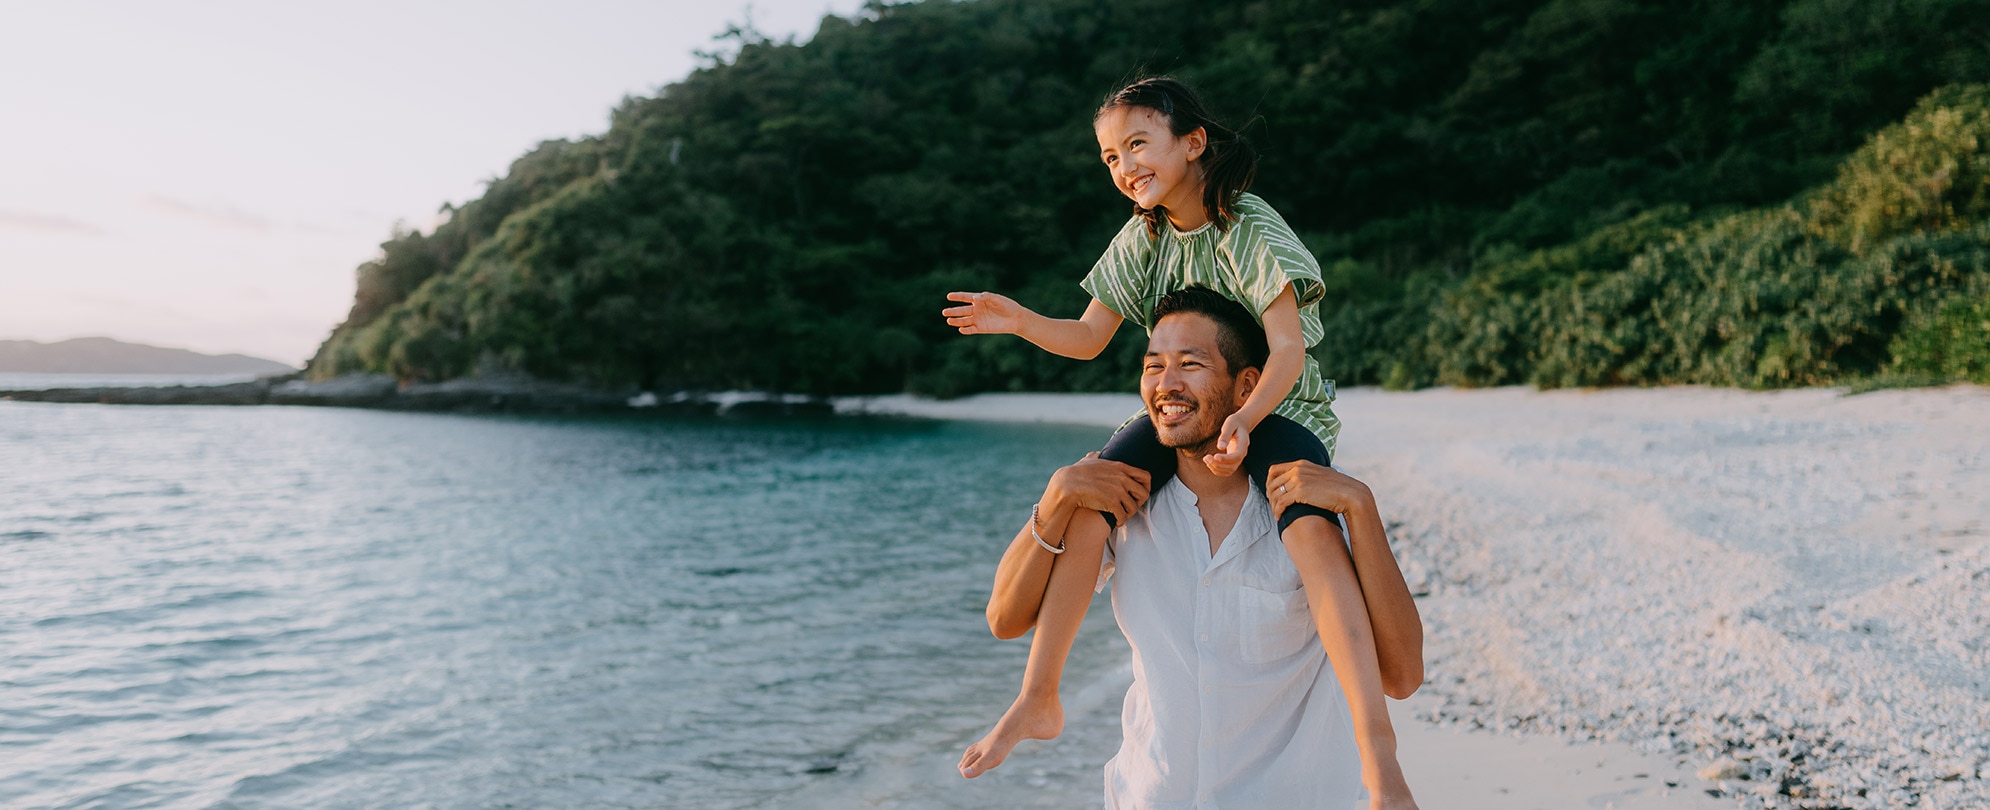 Father carries his daughter on her shoulders along the beach with the ocean and trees in the background.